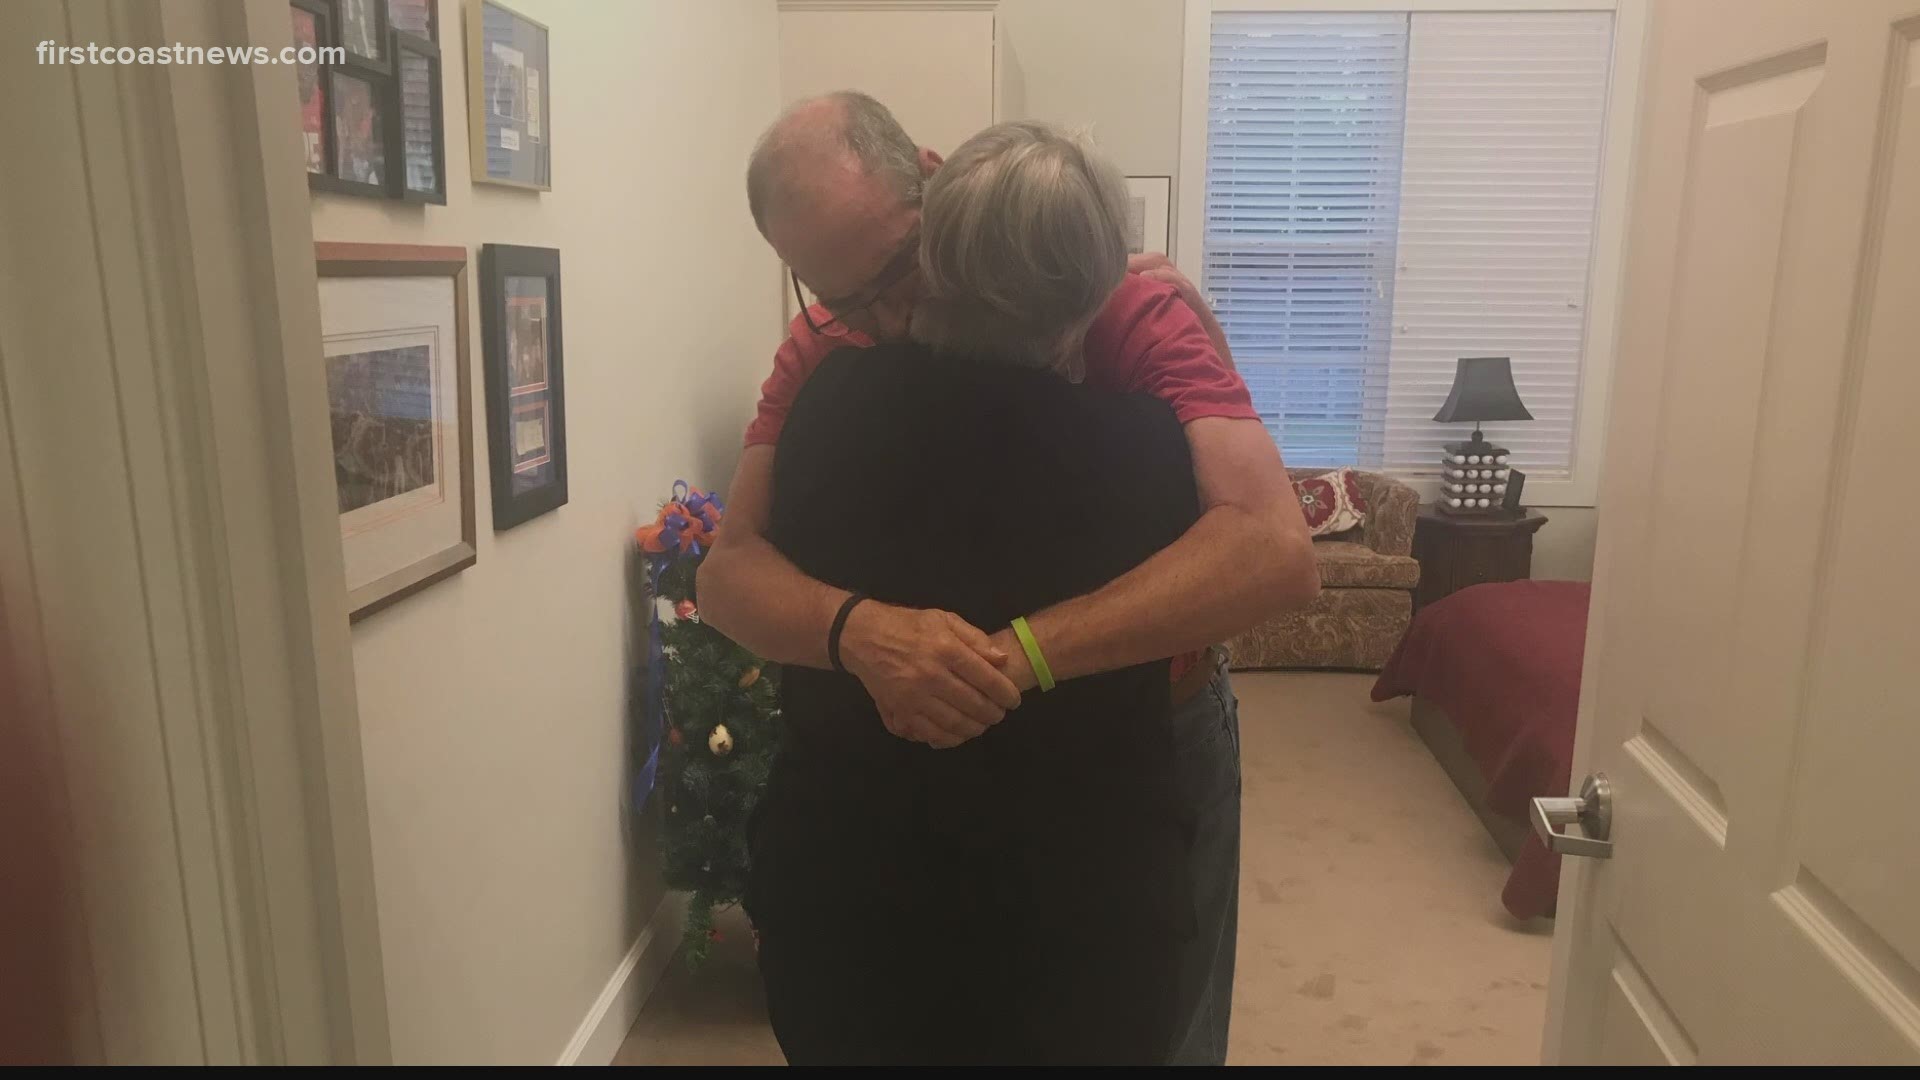 Mary was able to once again see her husband, Steve, thanks to getting a job in the facility where he is staying.